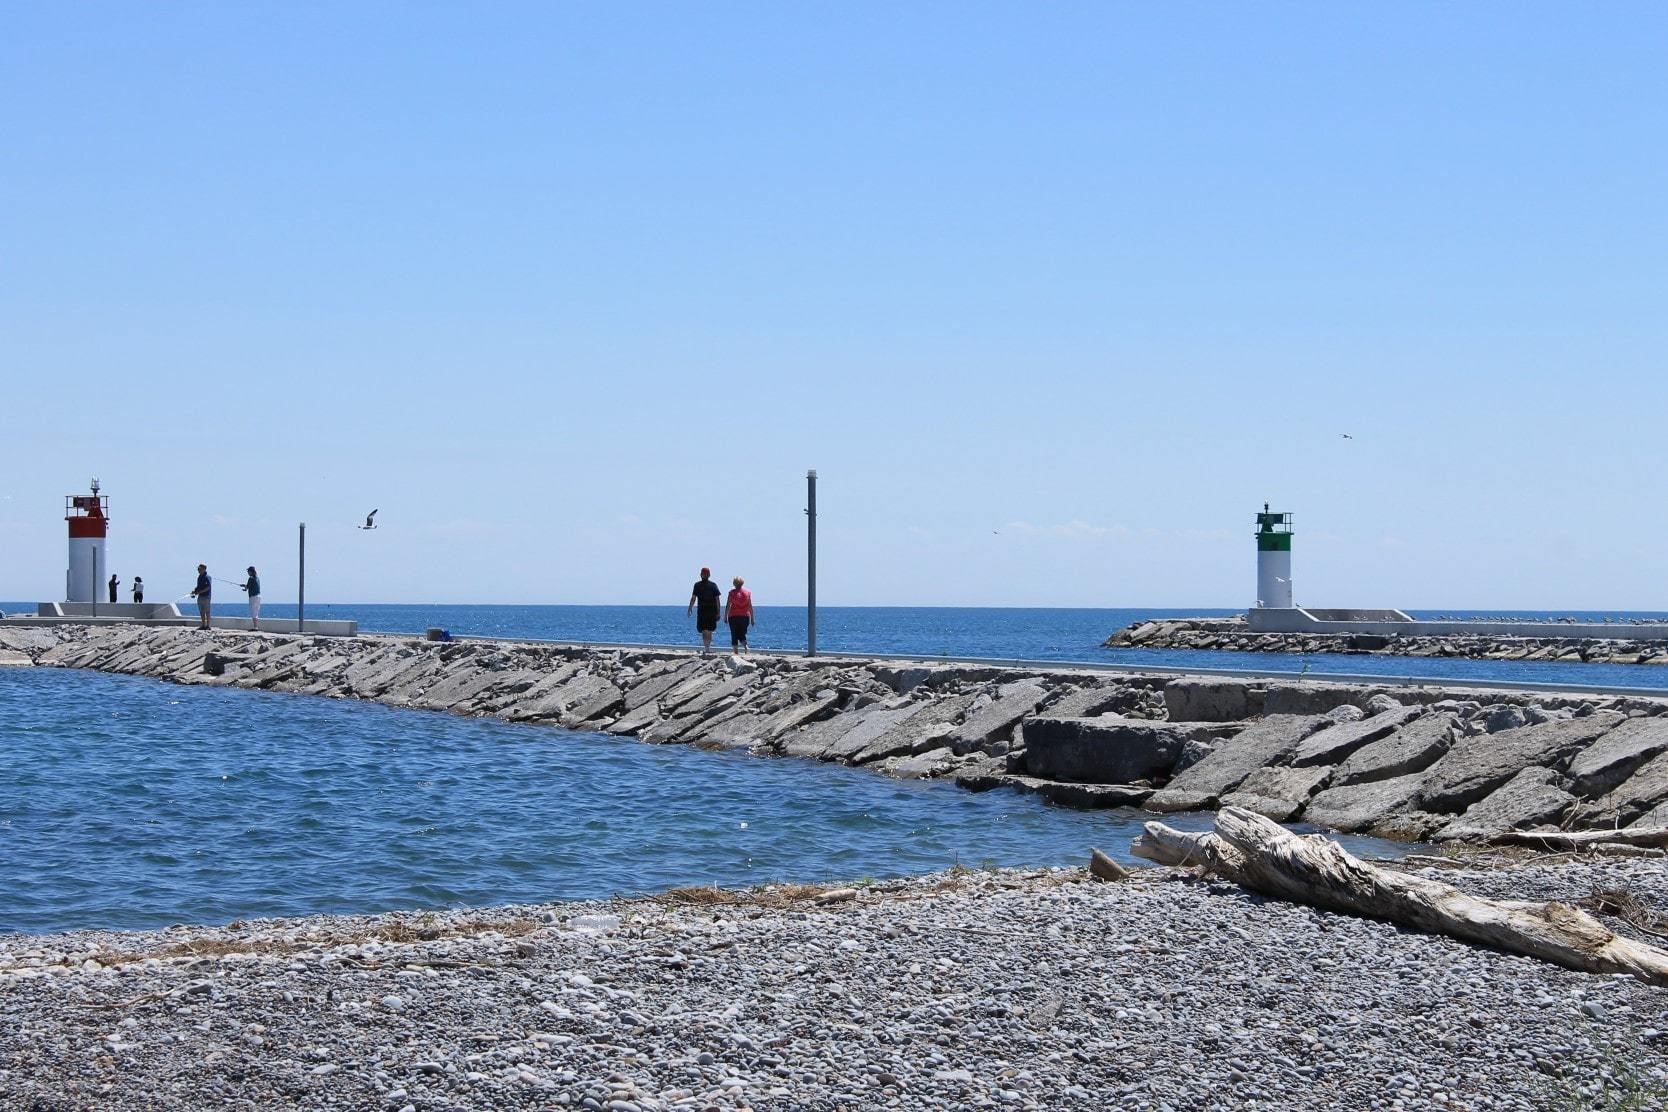 People walking on a pier along the waterfront trail in Pickering, Ontario, Canada